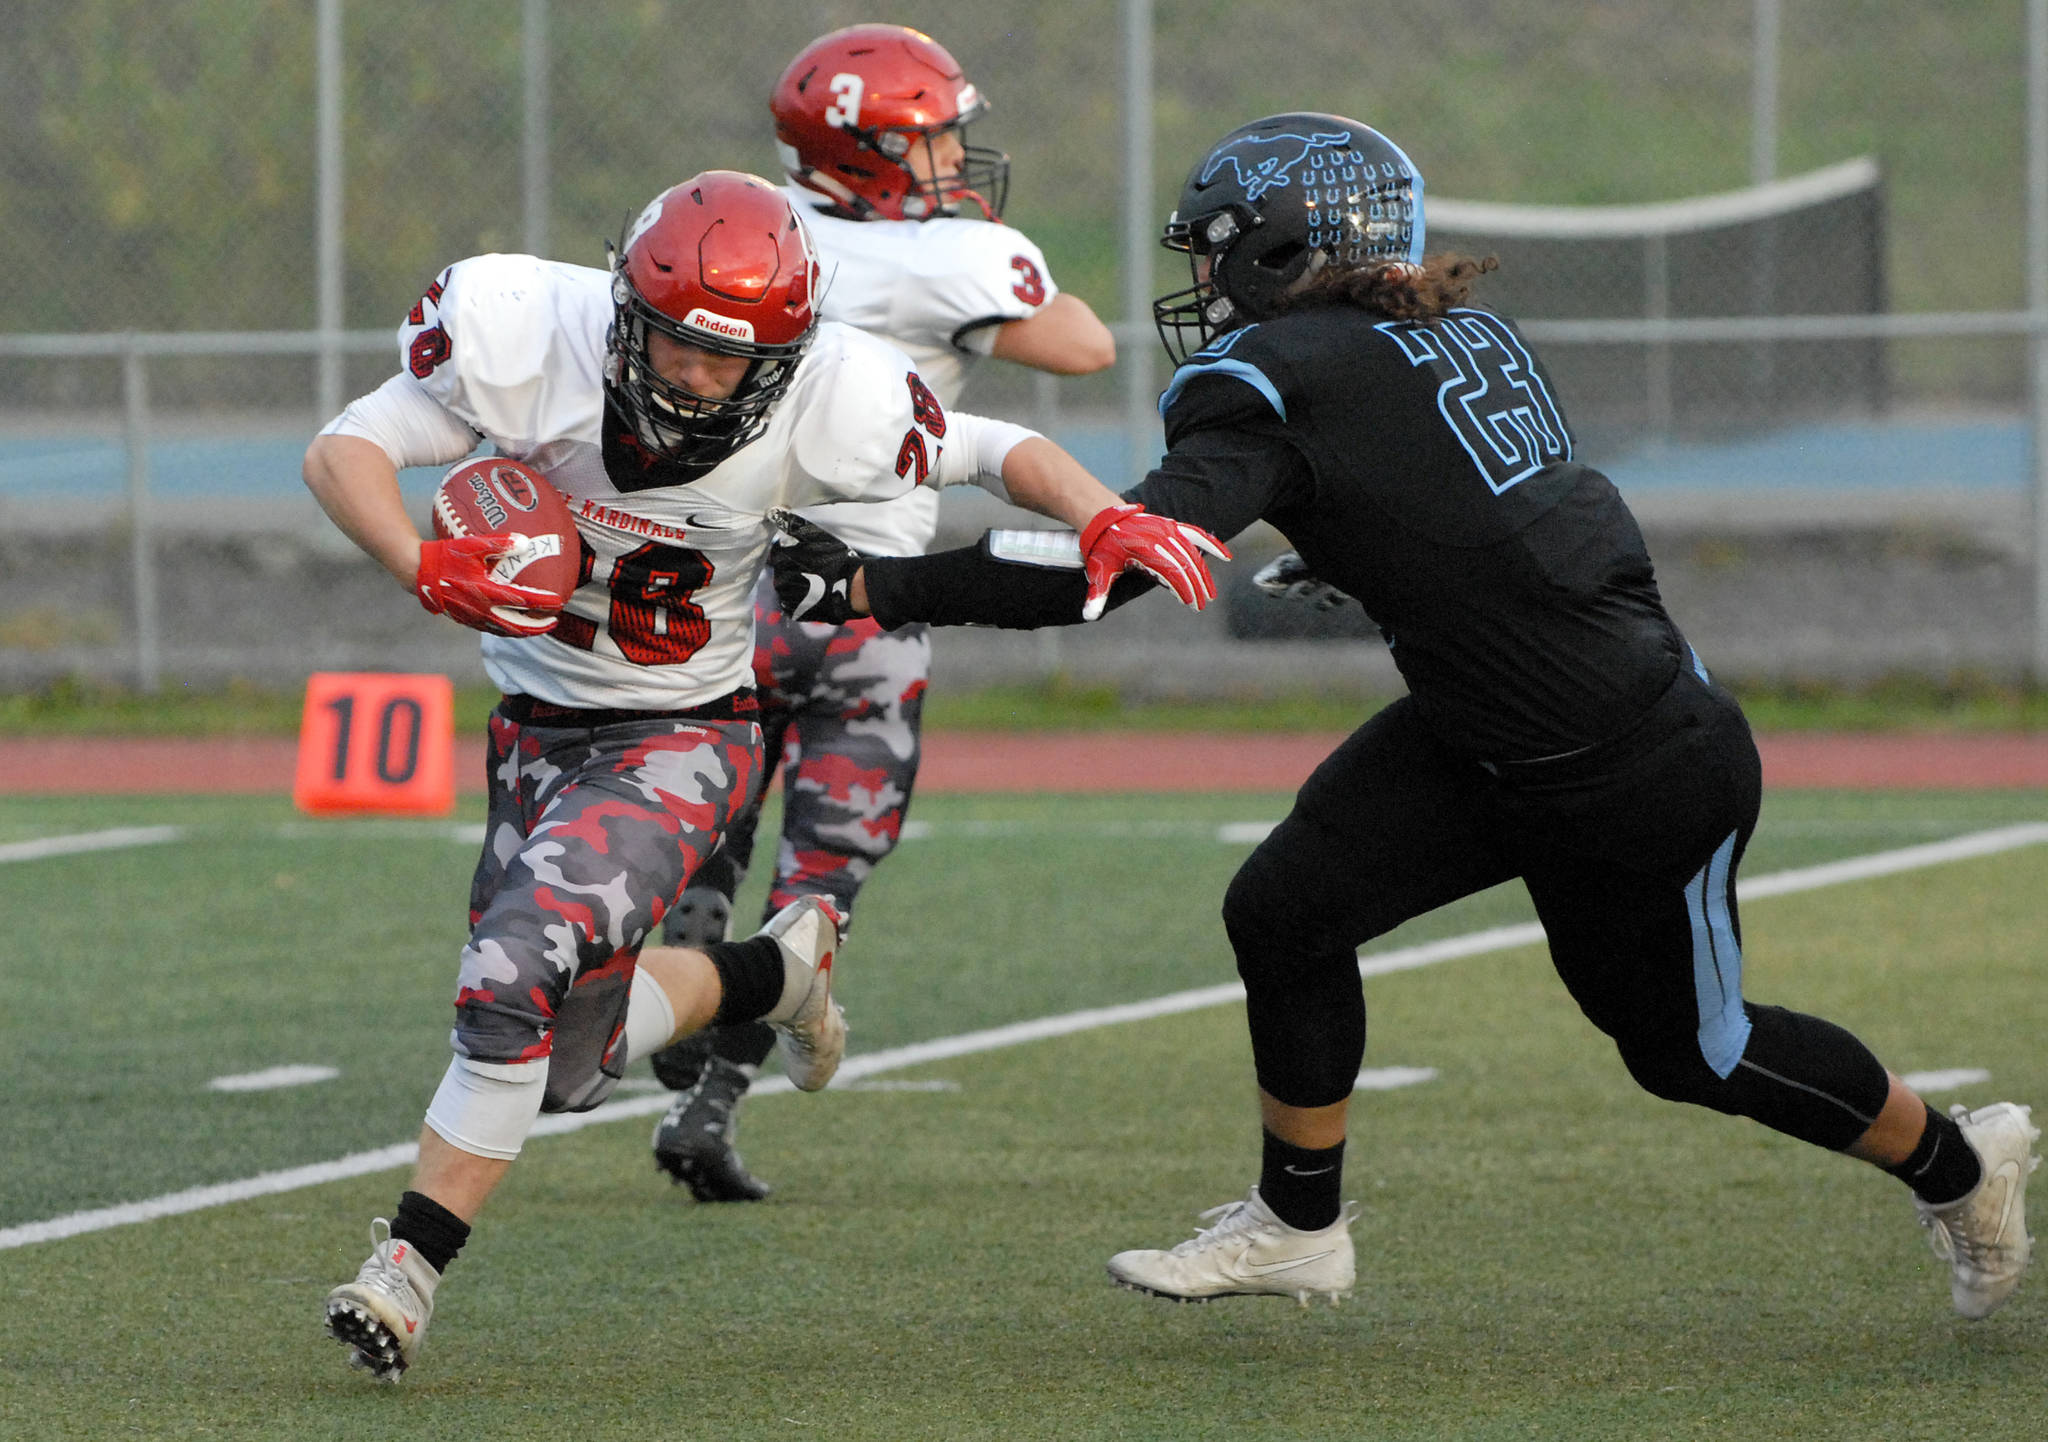 Kenai Central’s Ryker Riddall is tackled by Chugiak’s Ty Carlos during Chugiak’s 48-0 nonconference high school football win over Kenai on Friday, Sept. 15, 2017 at Tom Huffer Sr. Stadium in Chugiak. (Star photo by Matt Tunseth)